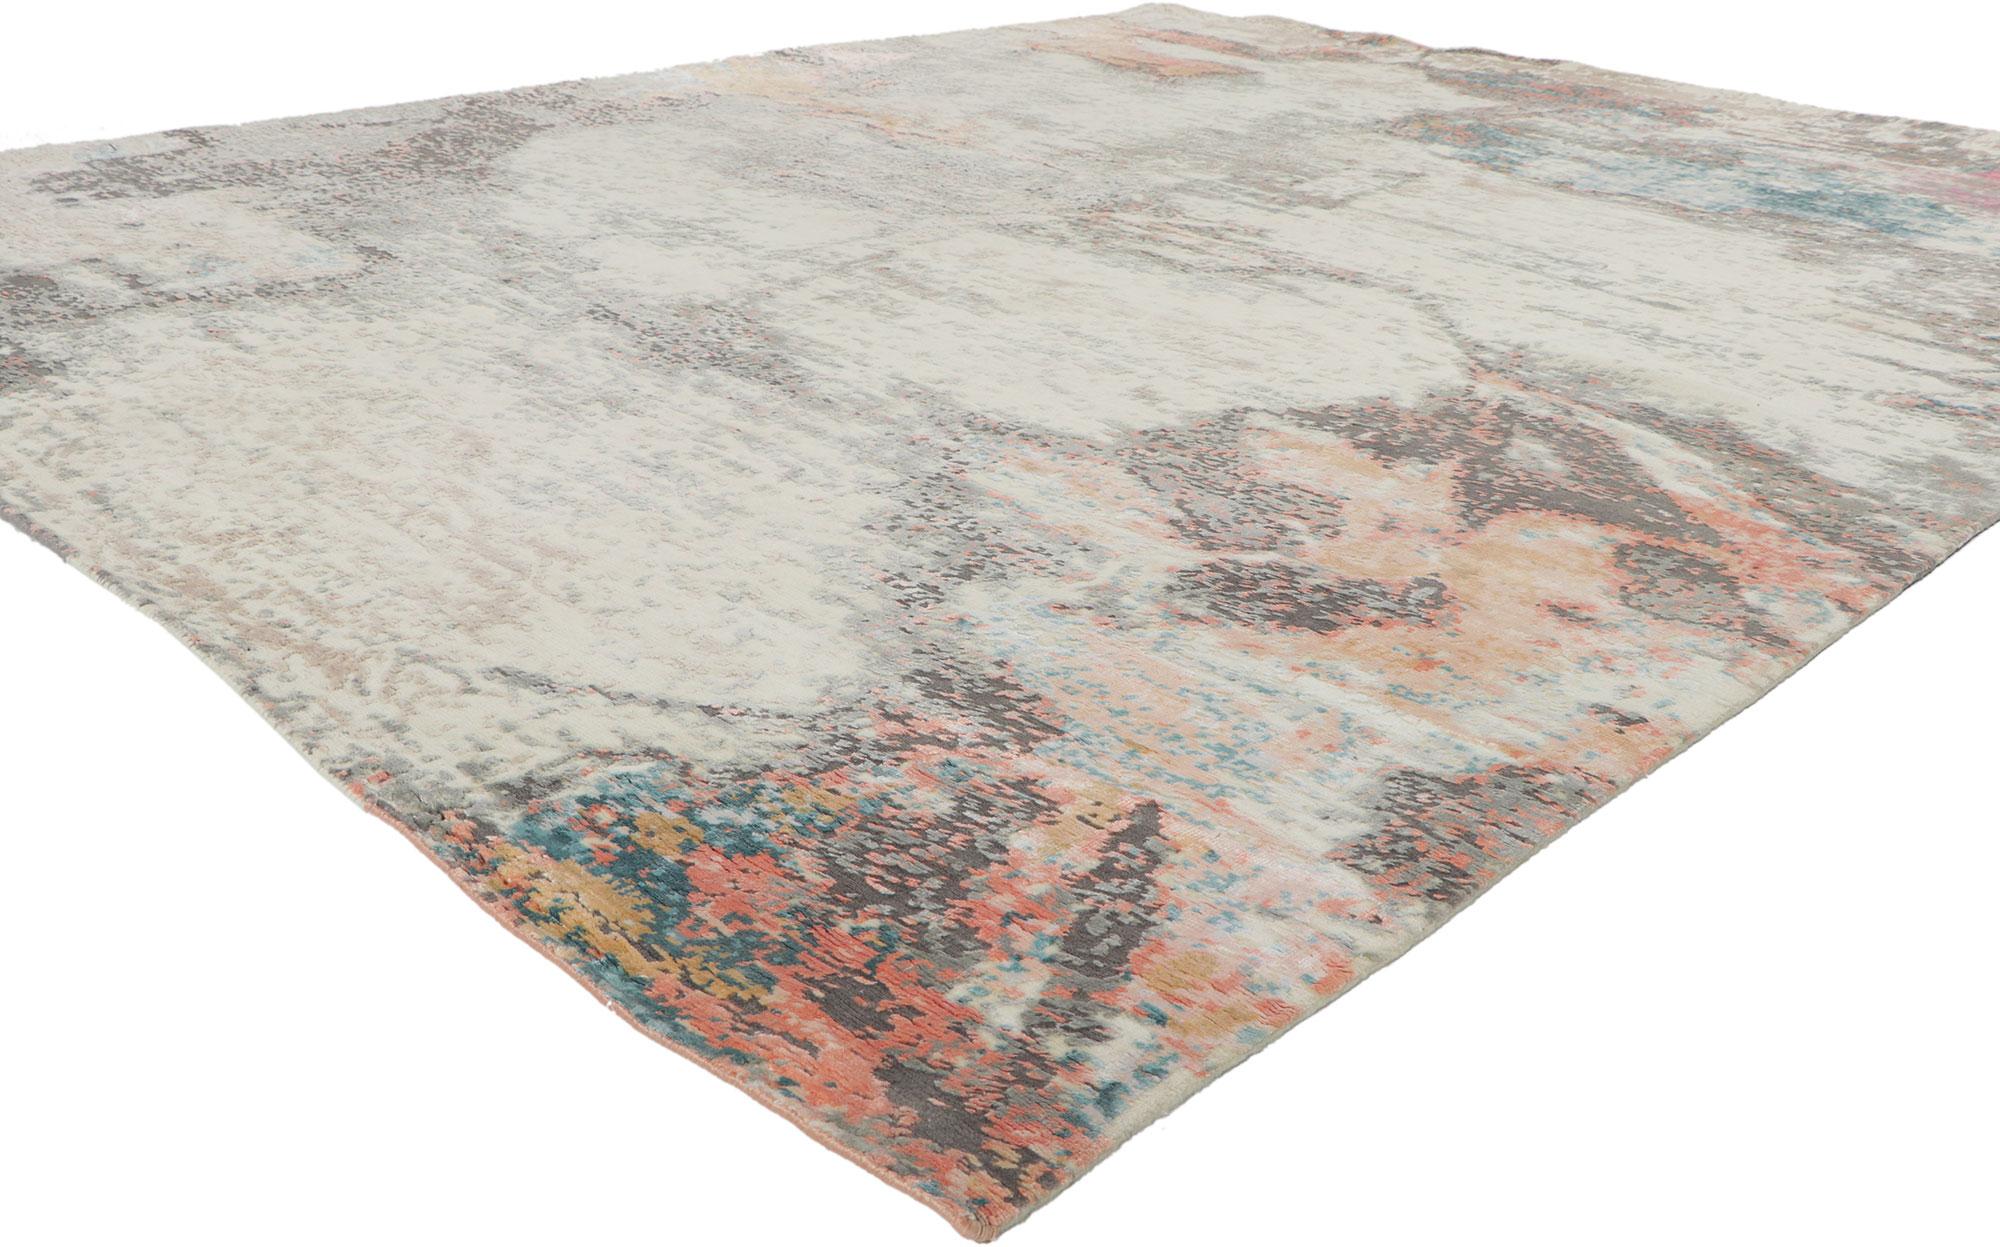 30864 New Contemporary Abstract rug Inspired by Helen Frankenthaler, 08'00 x 09'09. ?Showcasing a modern style and raised silk design with incredible detail and texture, this hand knotted contemporary textured rug is a captivating vision of woven